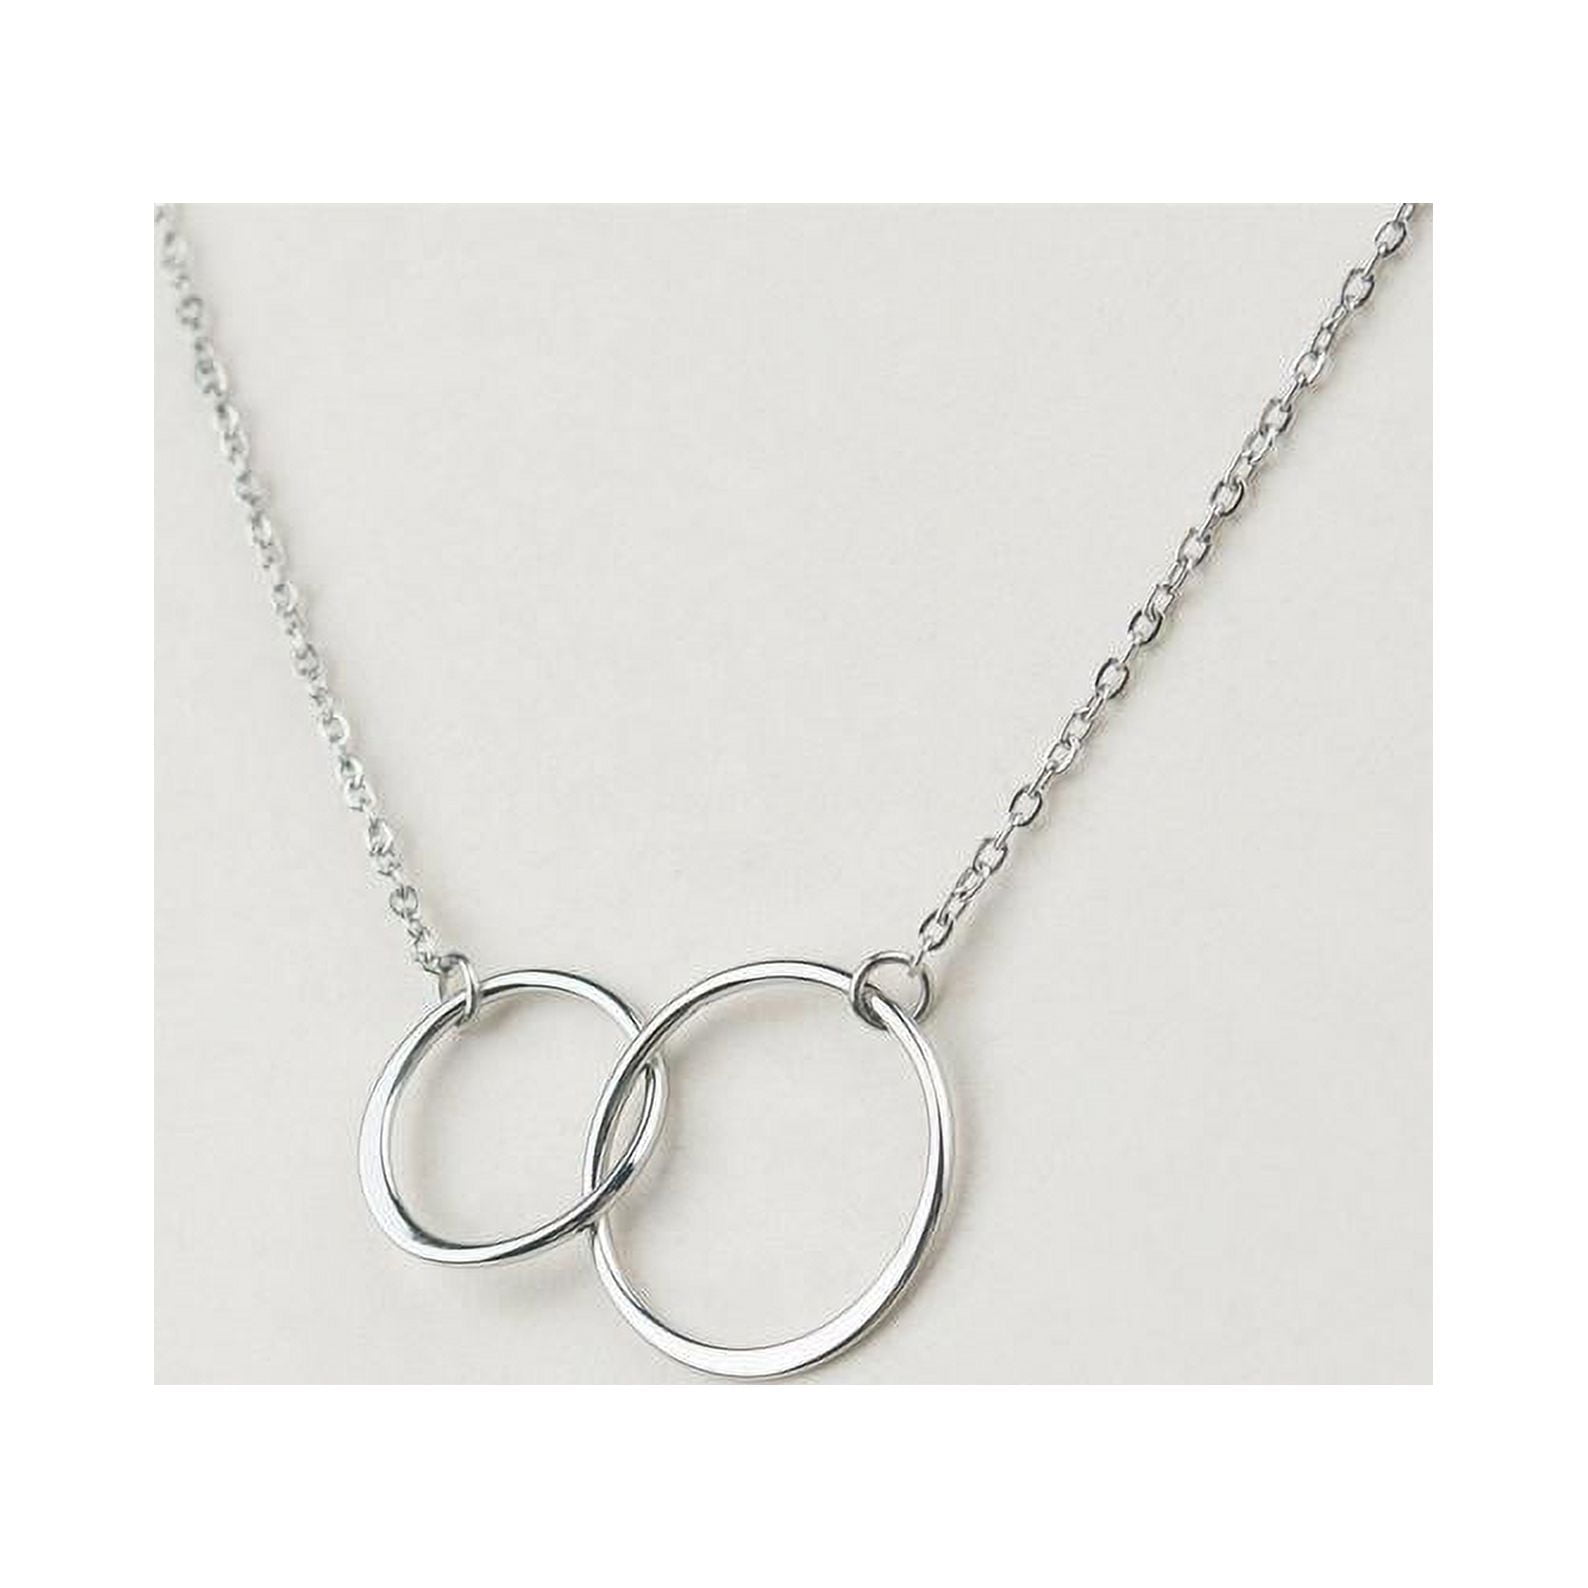 Double Circle Necklace Silver | Susi Cala Jewelry